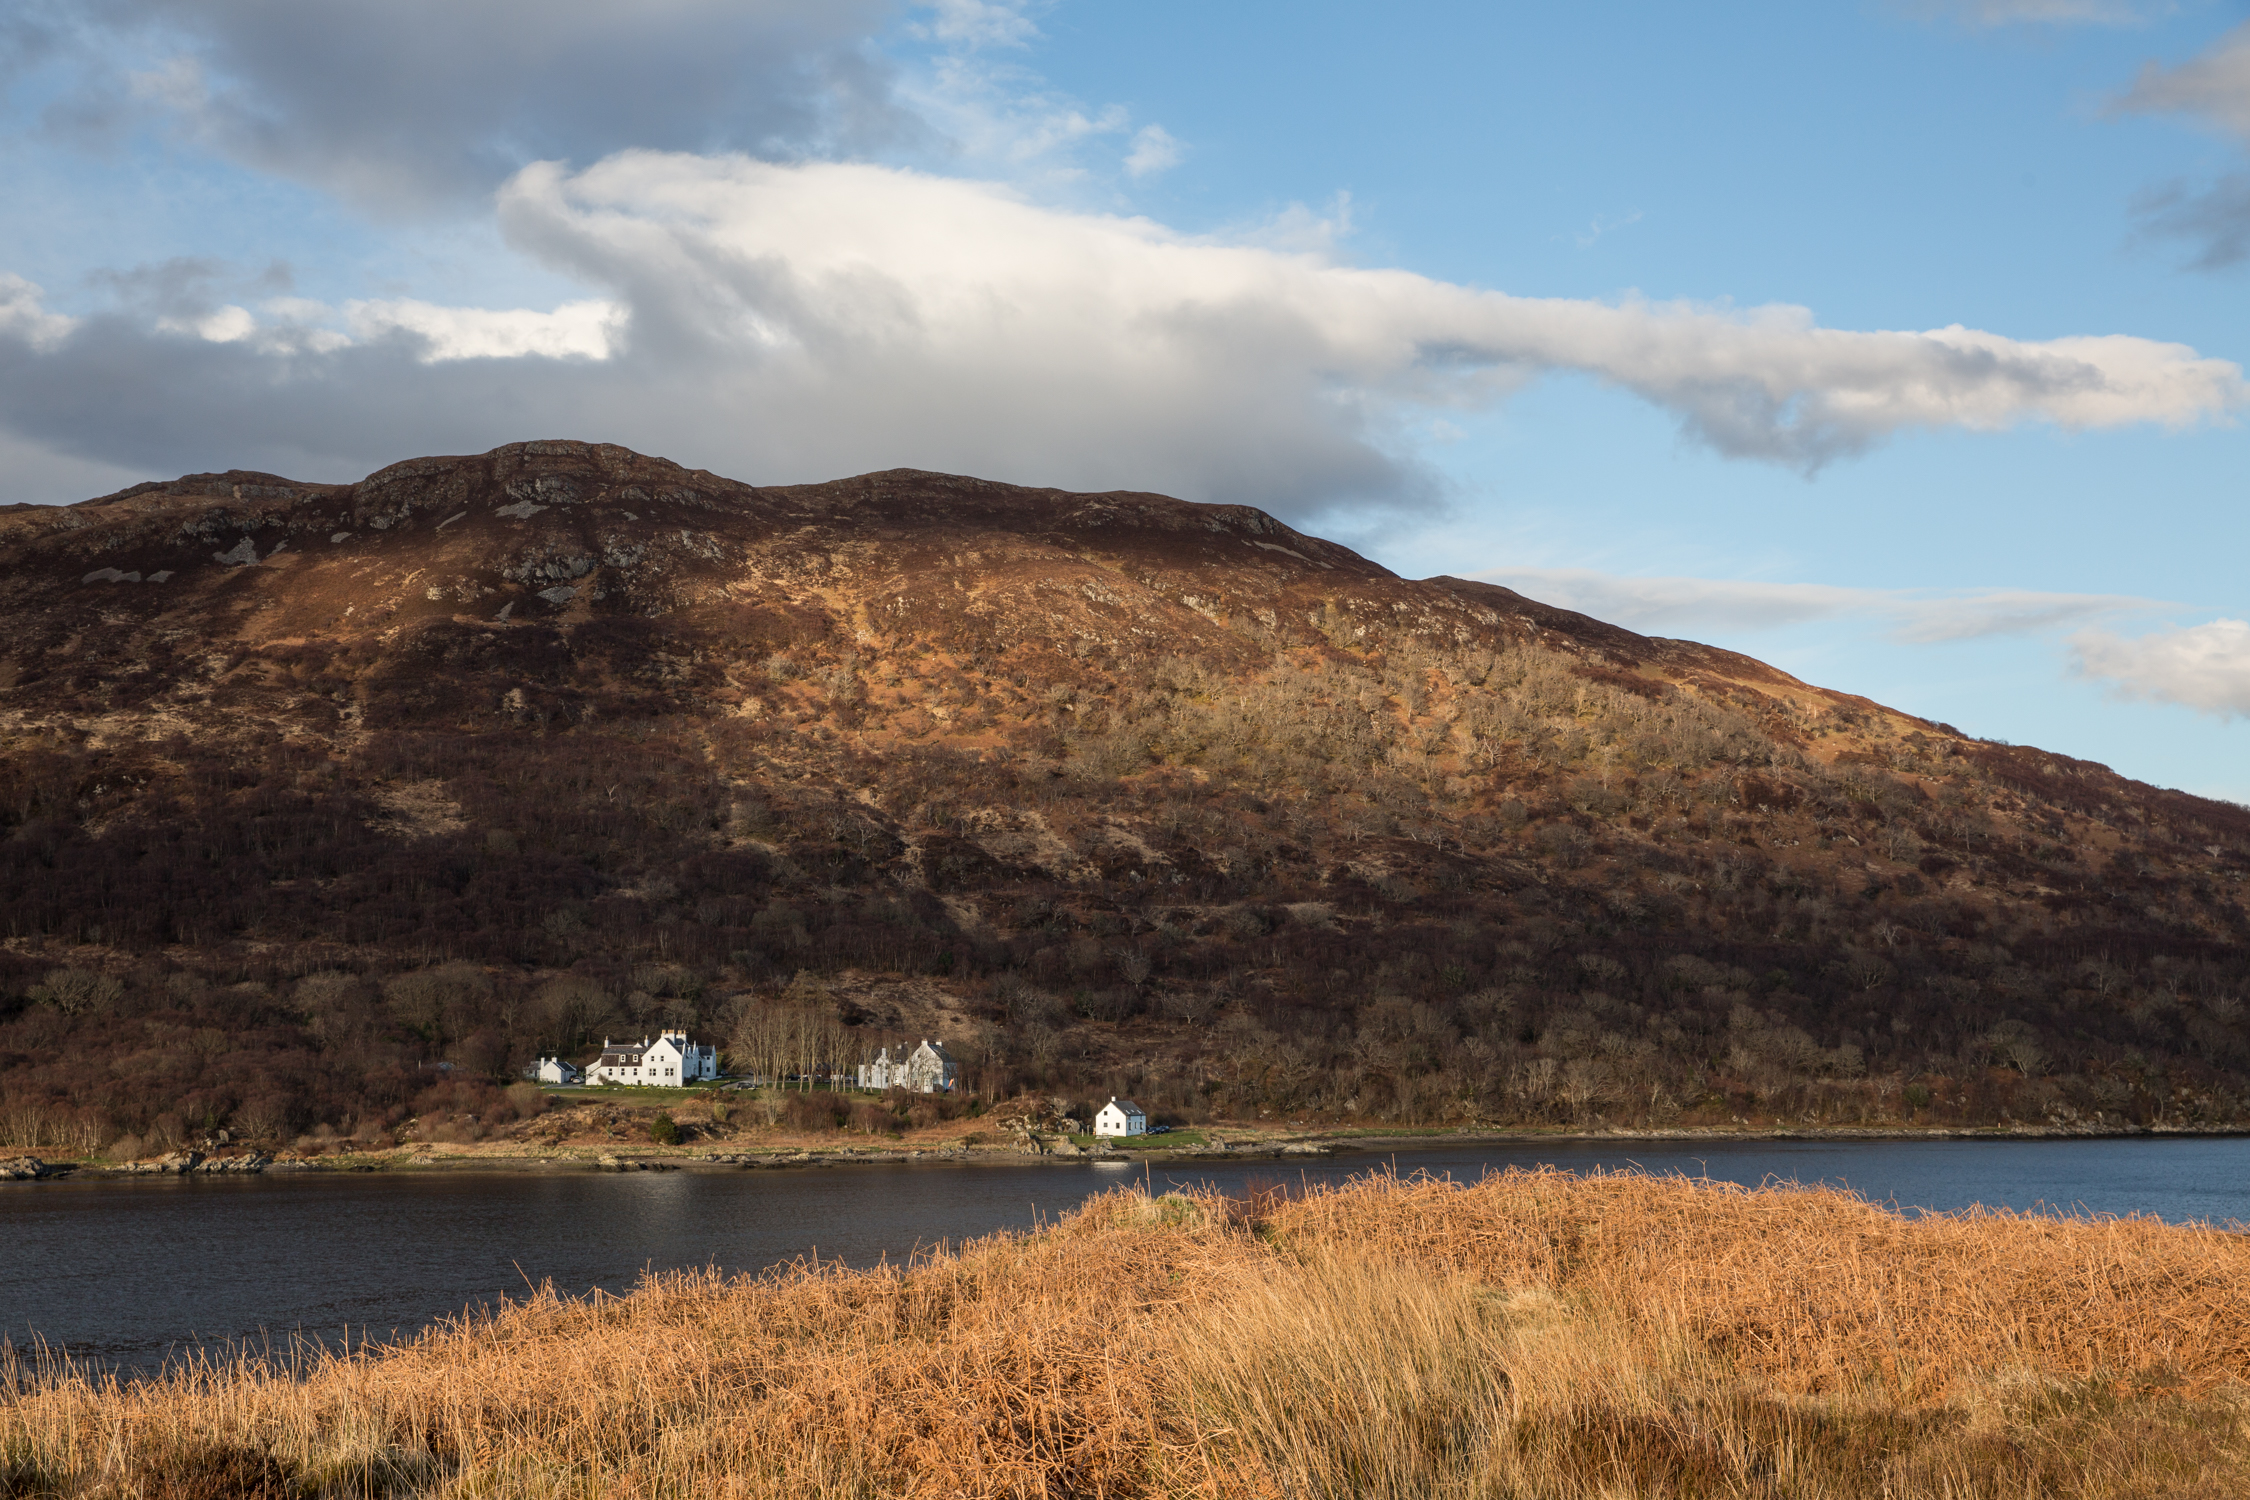 On the shores of Loch na Dal, Kinloch Lodge Hotel in Skye with the Cuillin mountains in the distance